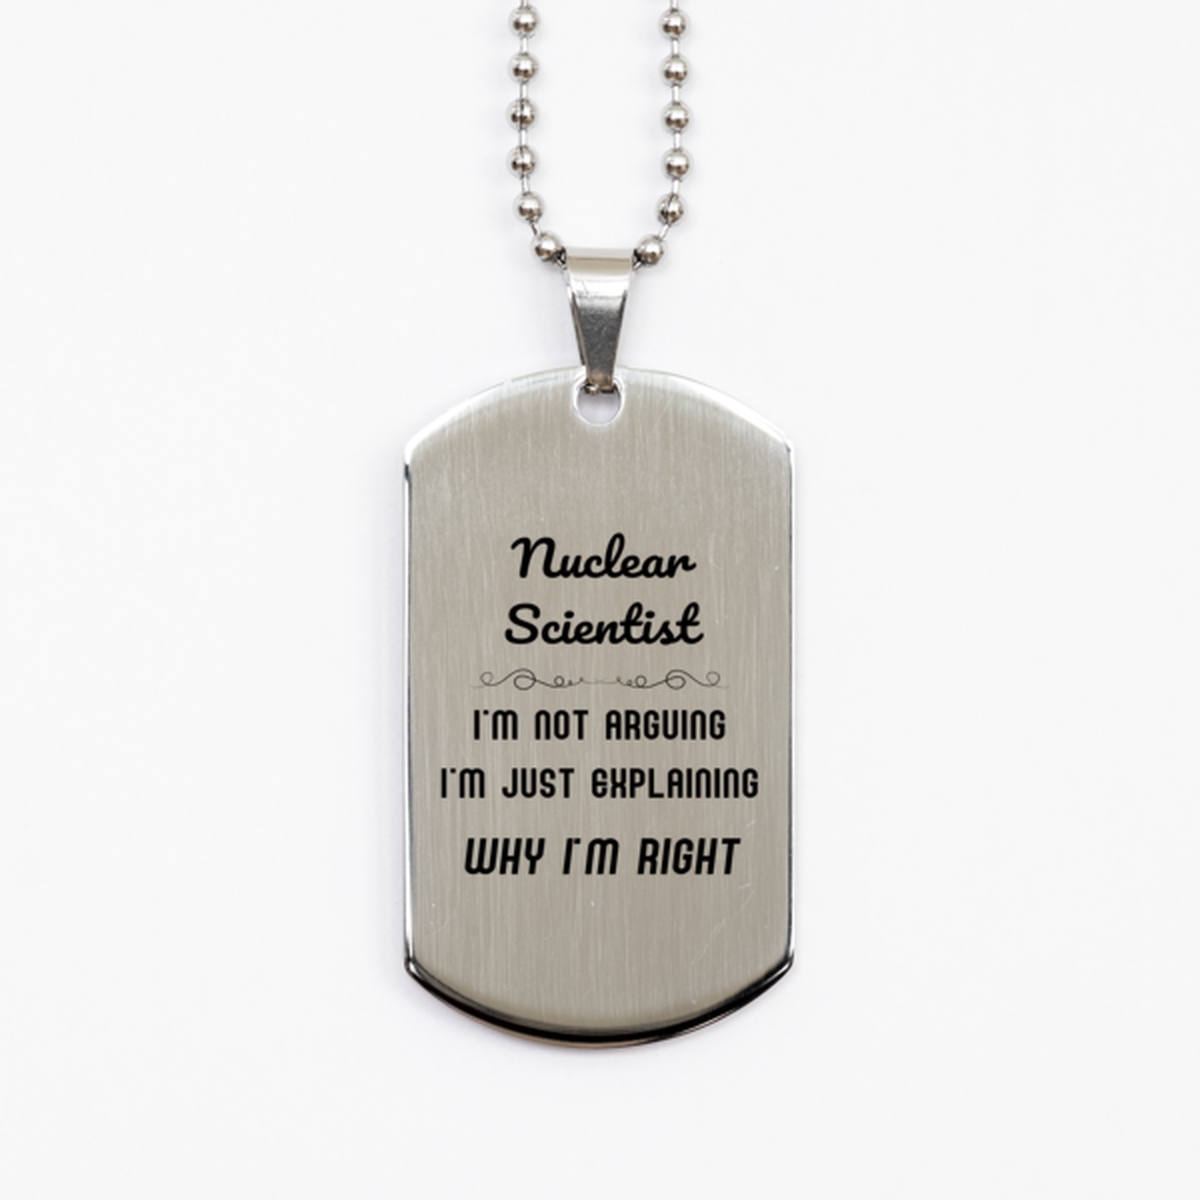 Nuclear Scientist I'm not Arguing. I'm Just Explaining Why I'm RIGHT Silver Dog Tag, Funny Saying Quote Nuclear Scientist Gifts For Nuclear Scientist Graduation Birthday Christmas Gifts for Men Women Coworker